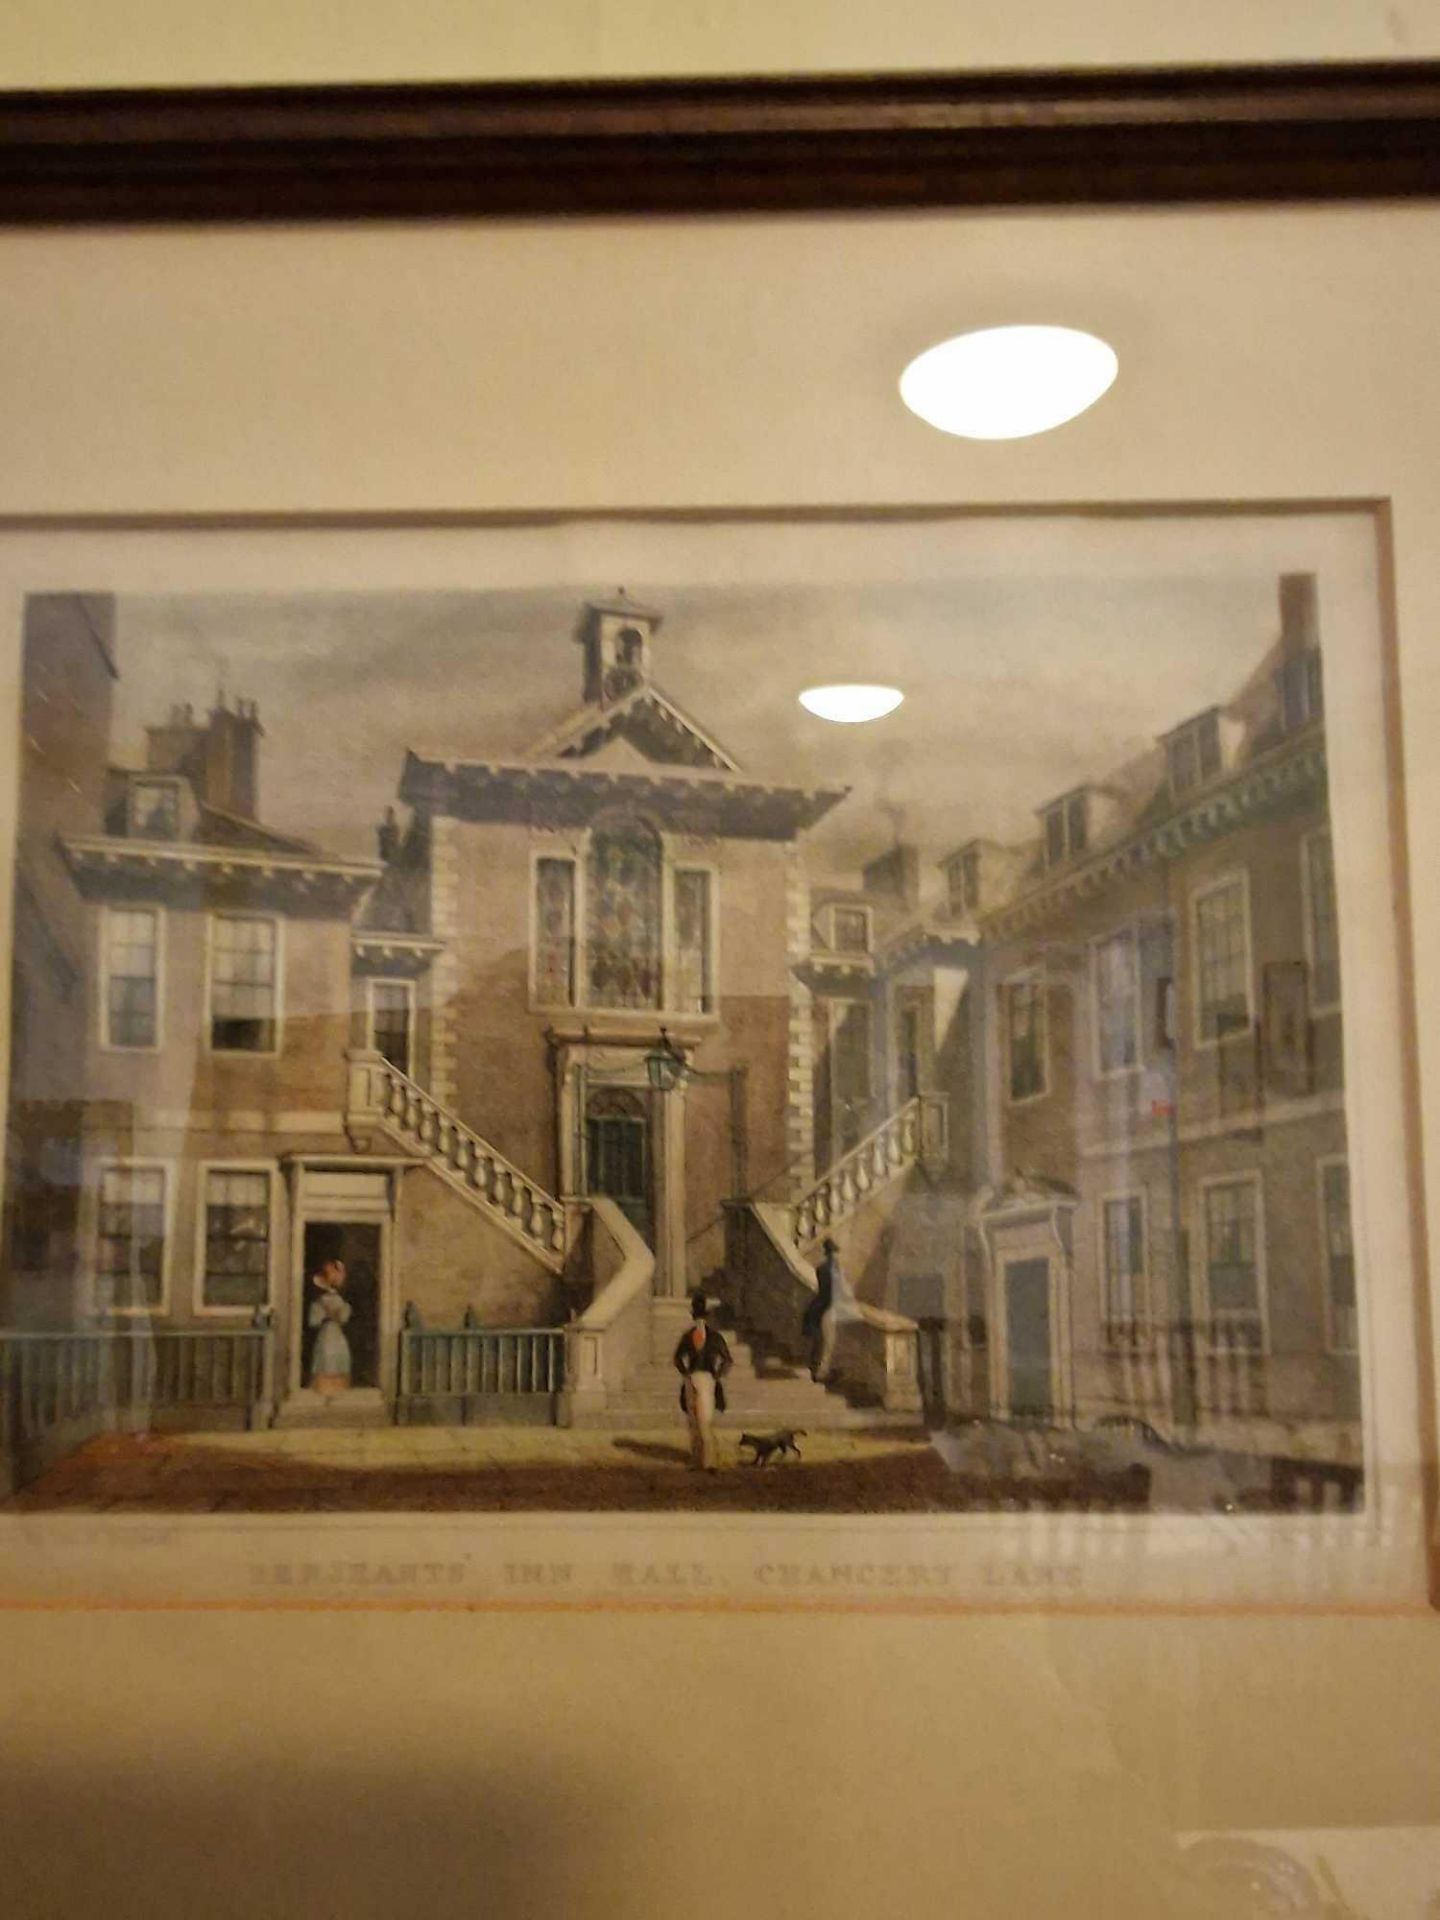 Framed Etching Pencil And Charcoal Westminster Palace Signed Edward Spragg Cherry (British 1913- - Image 4 of 4